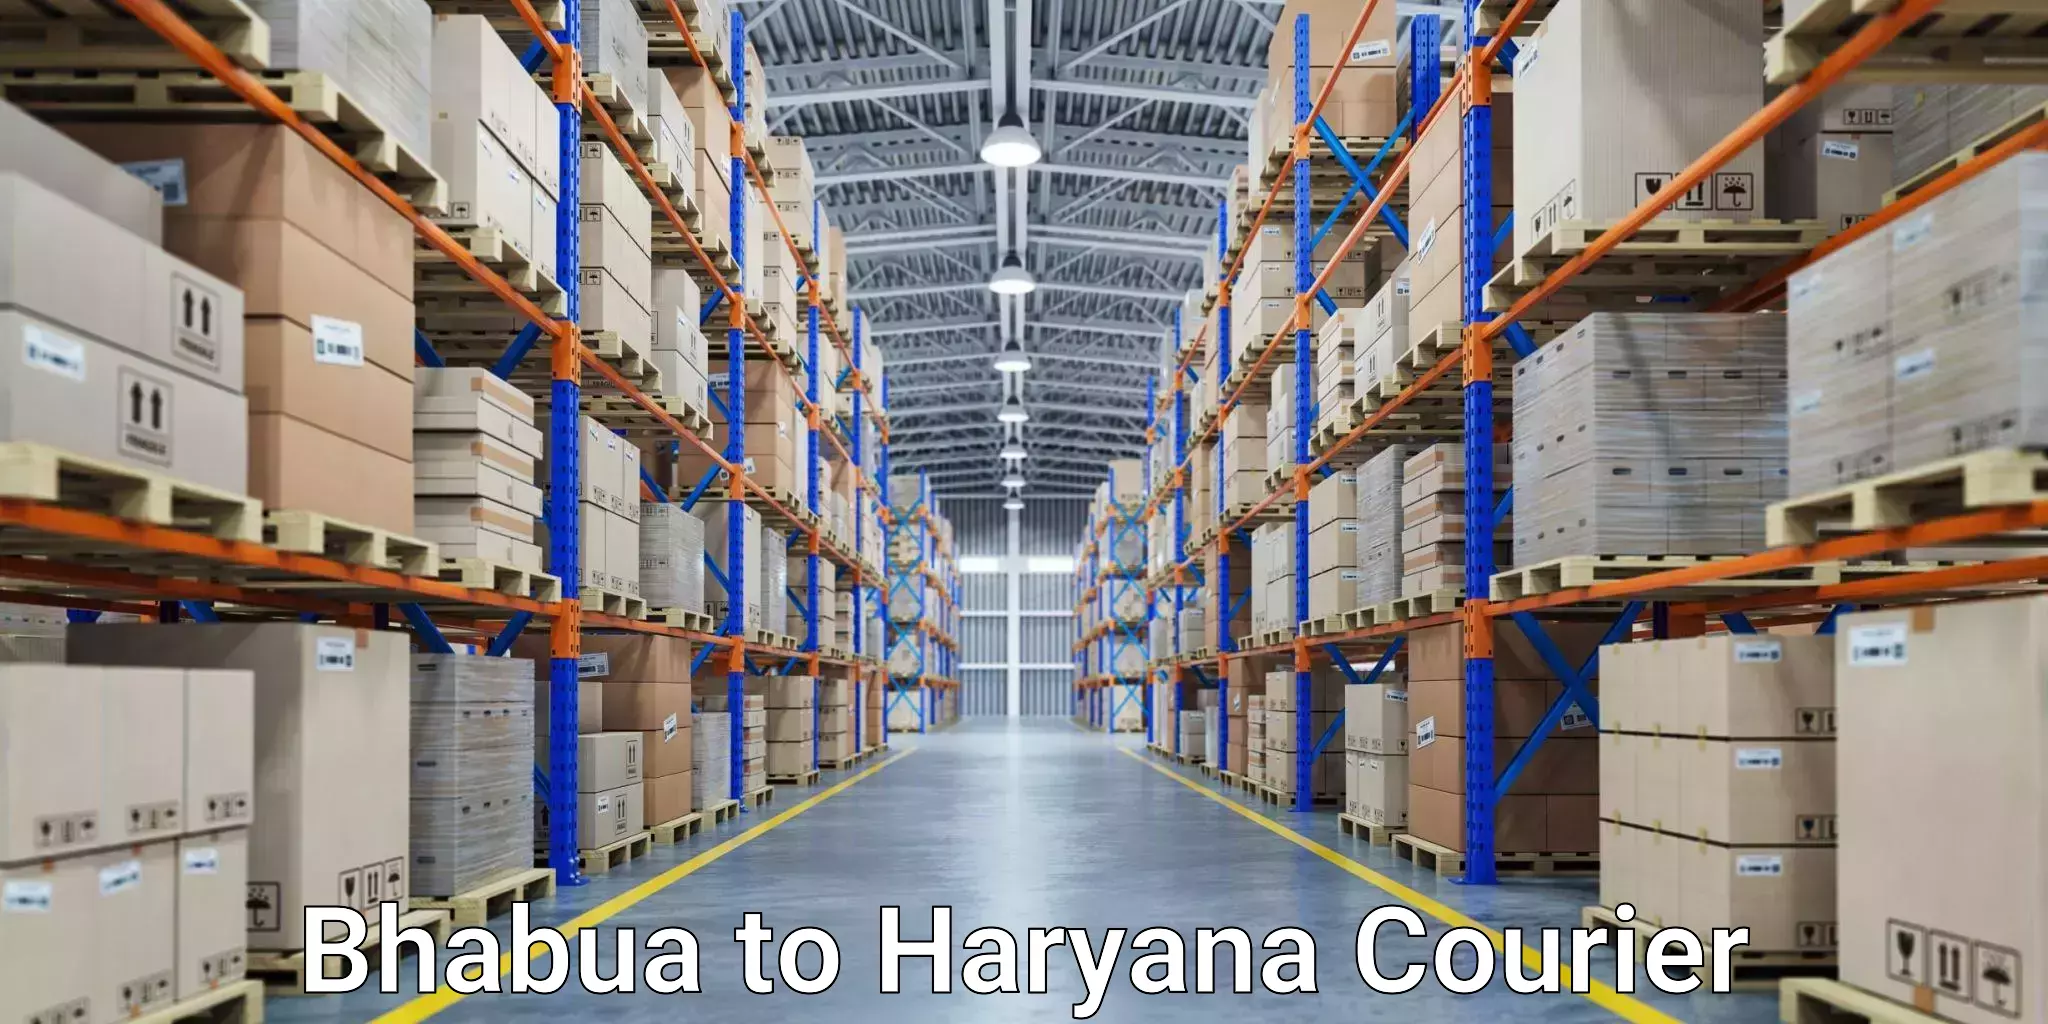 Parcel delivery automation Bhabua to NCR Haryana